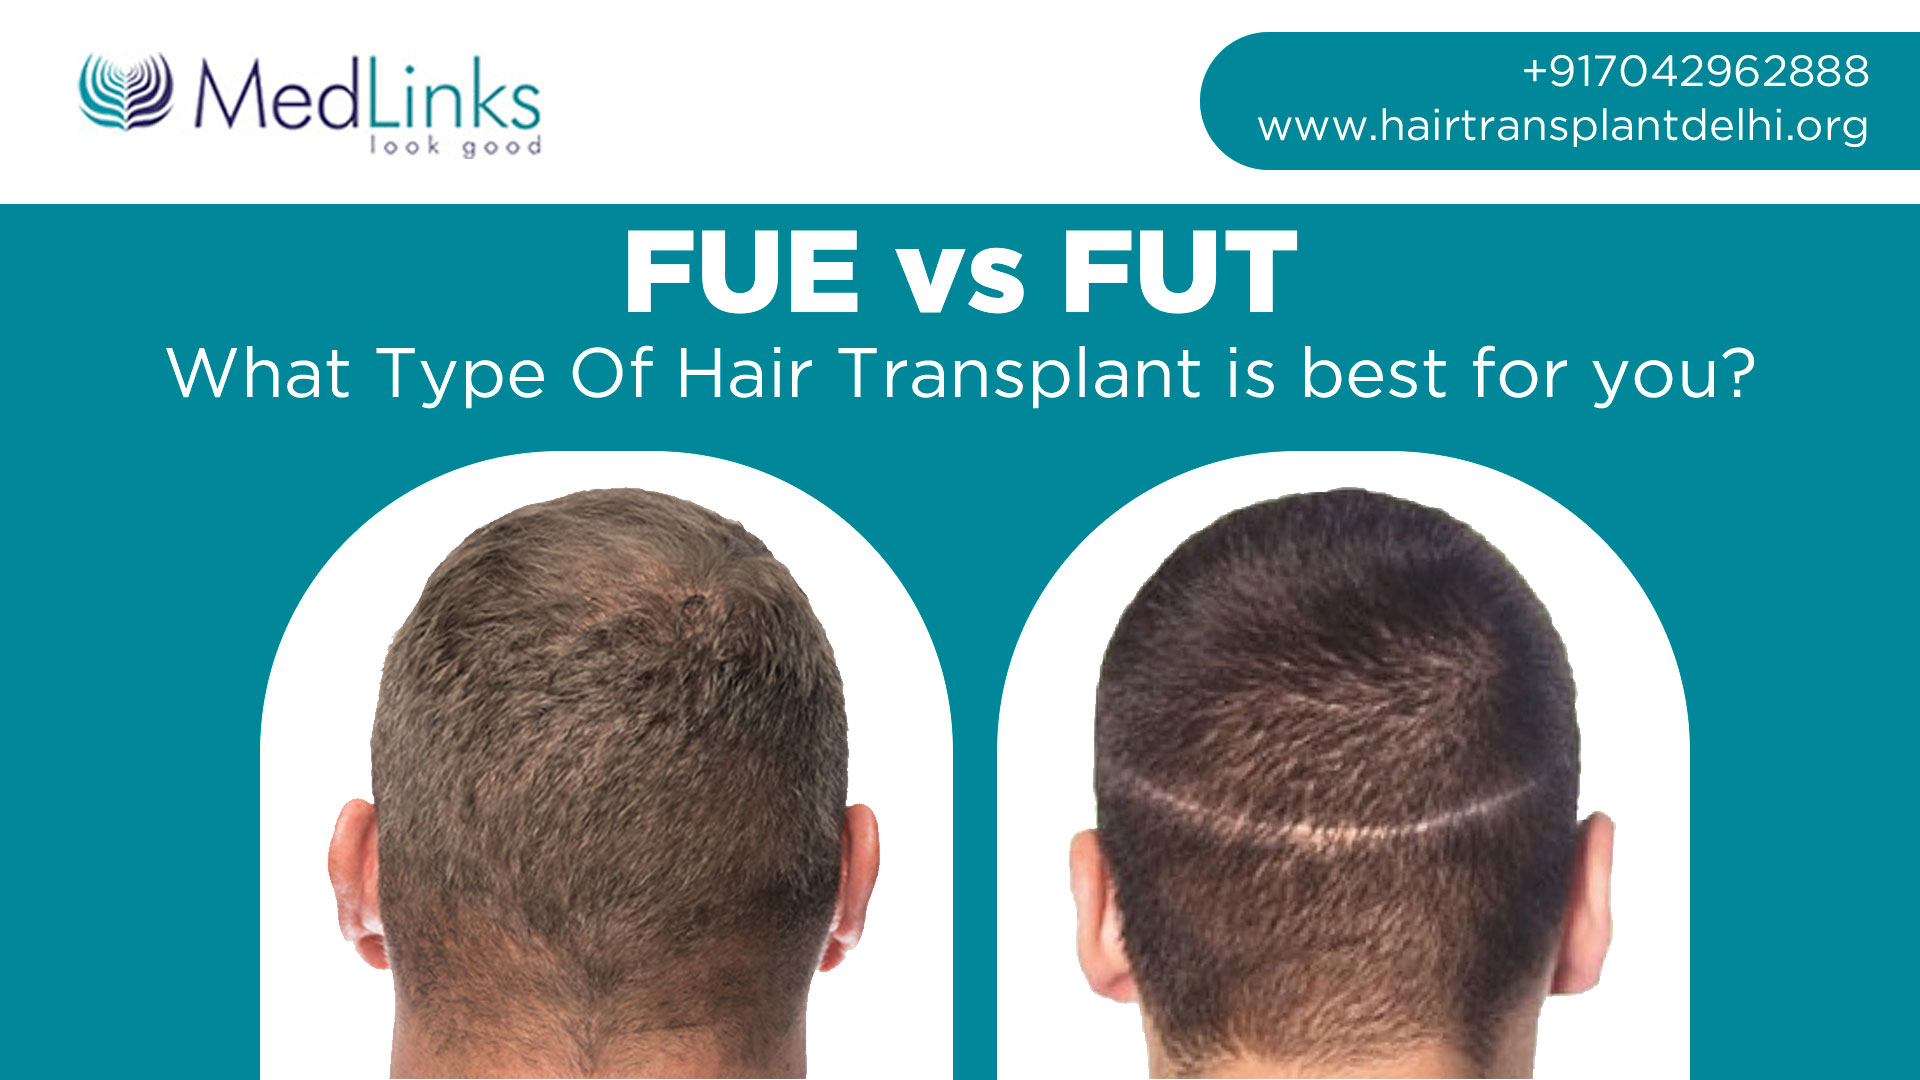 FUE vs. FUT: What Type of Hair Transplant is Best for you? | MedLinks